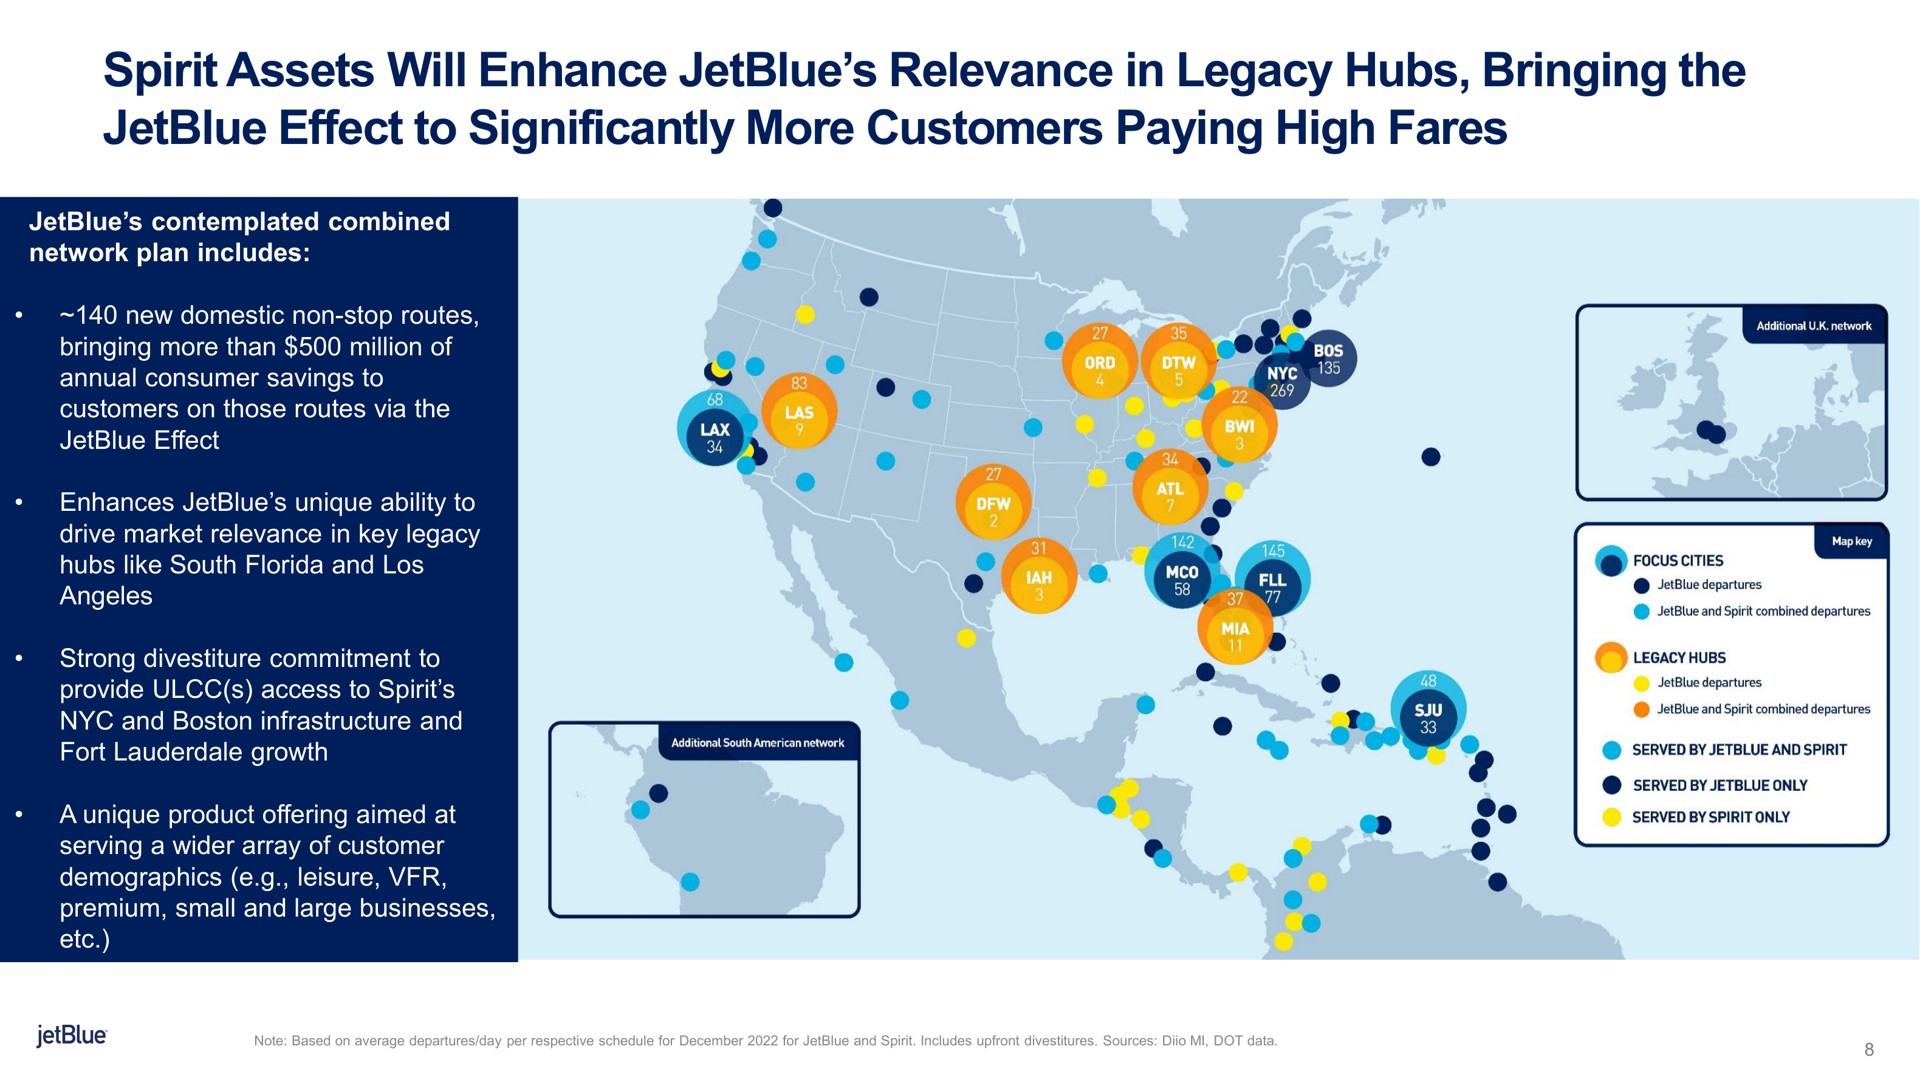 spirit assets will enhance relevance in legacy hubs bringing the effect to significantly more customers paying high fares | jetBlue